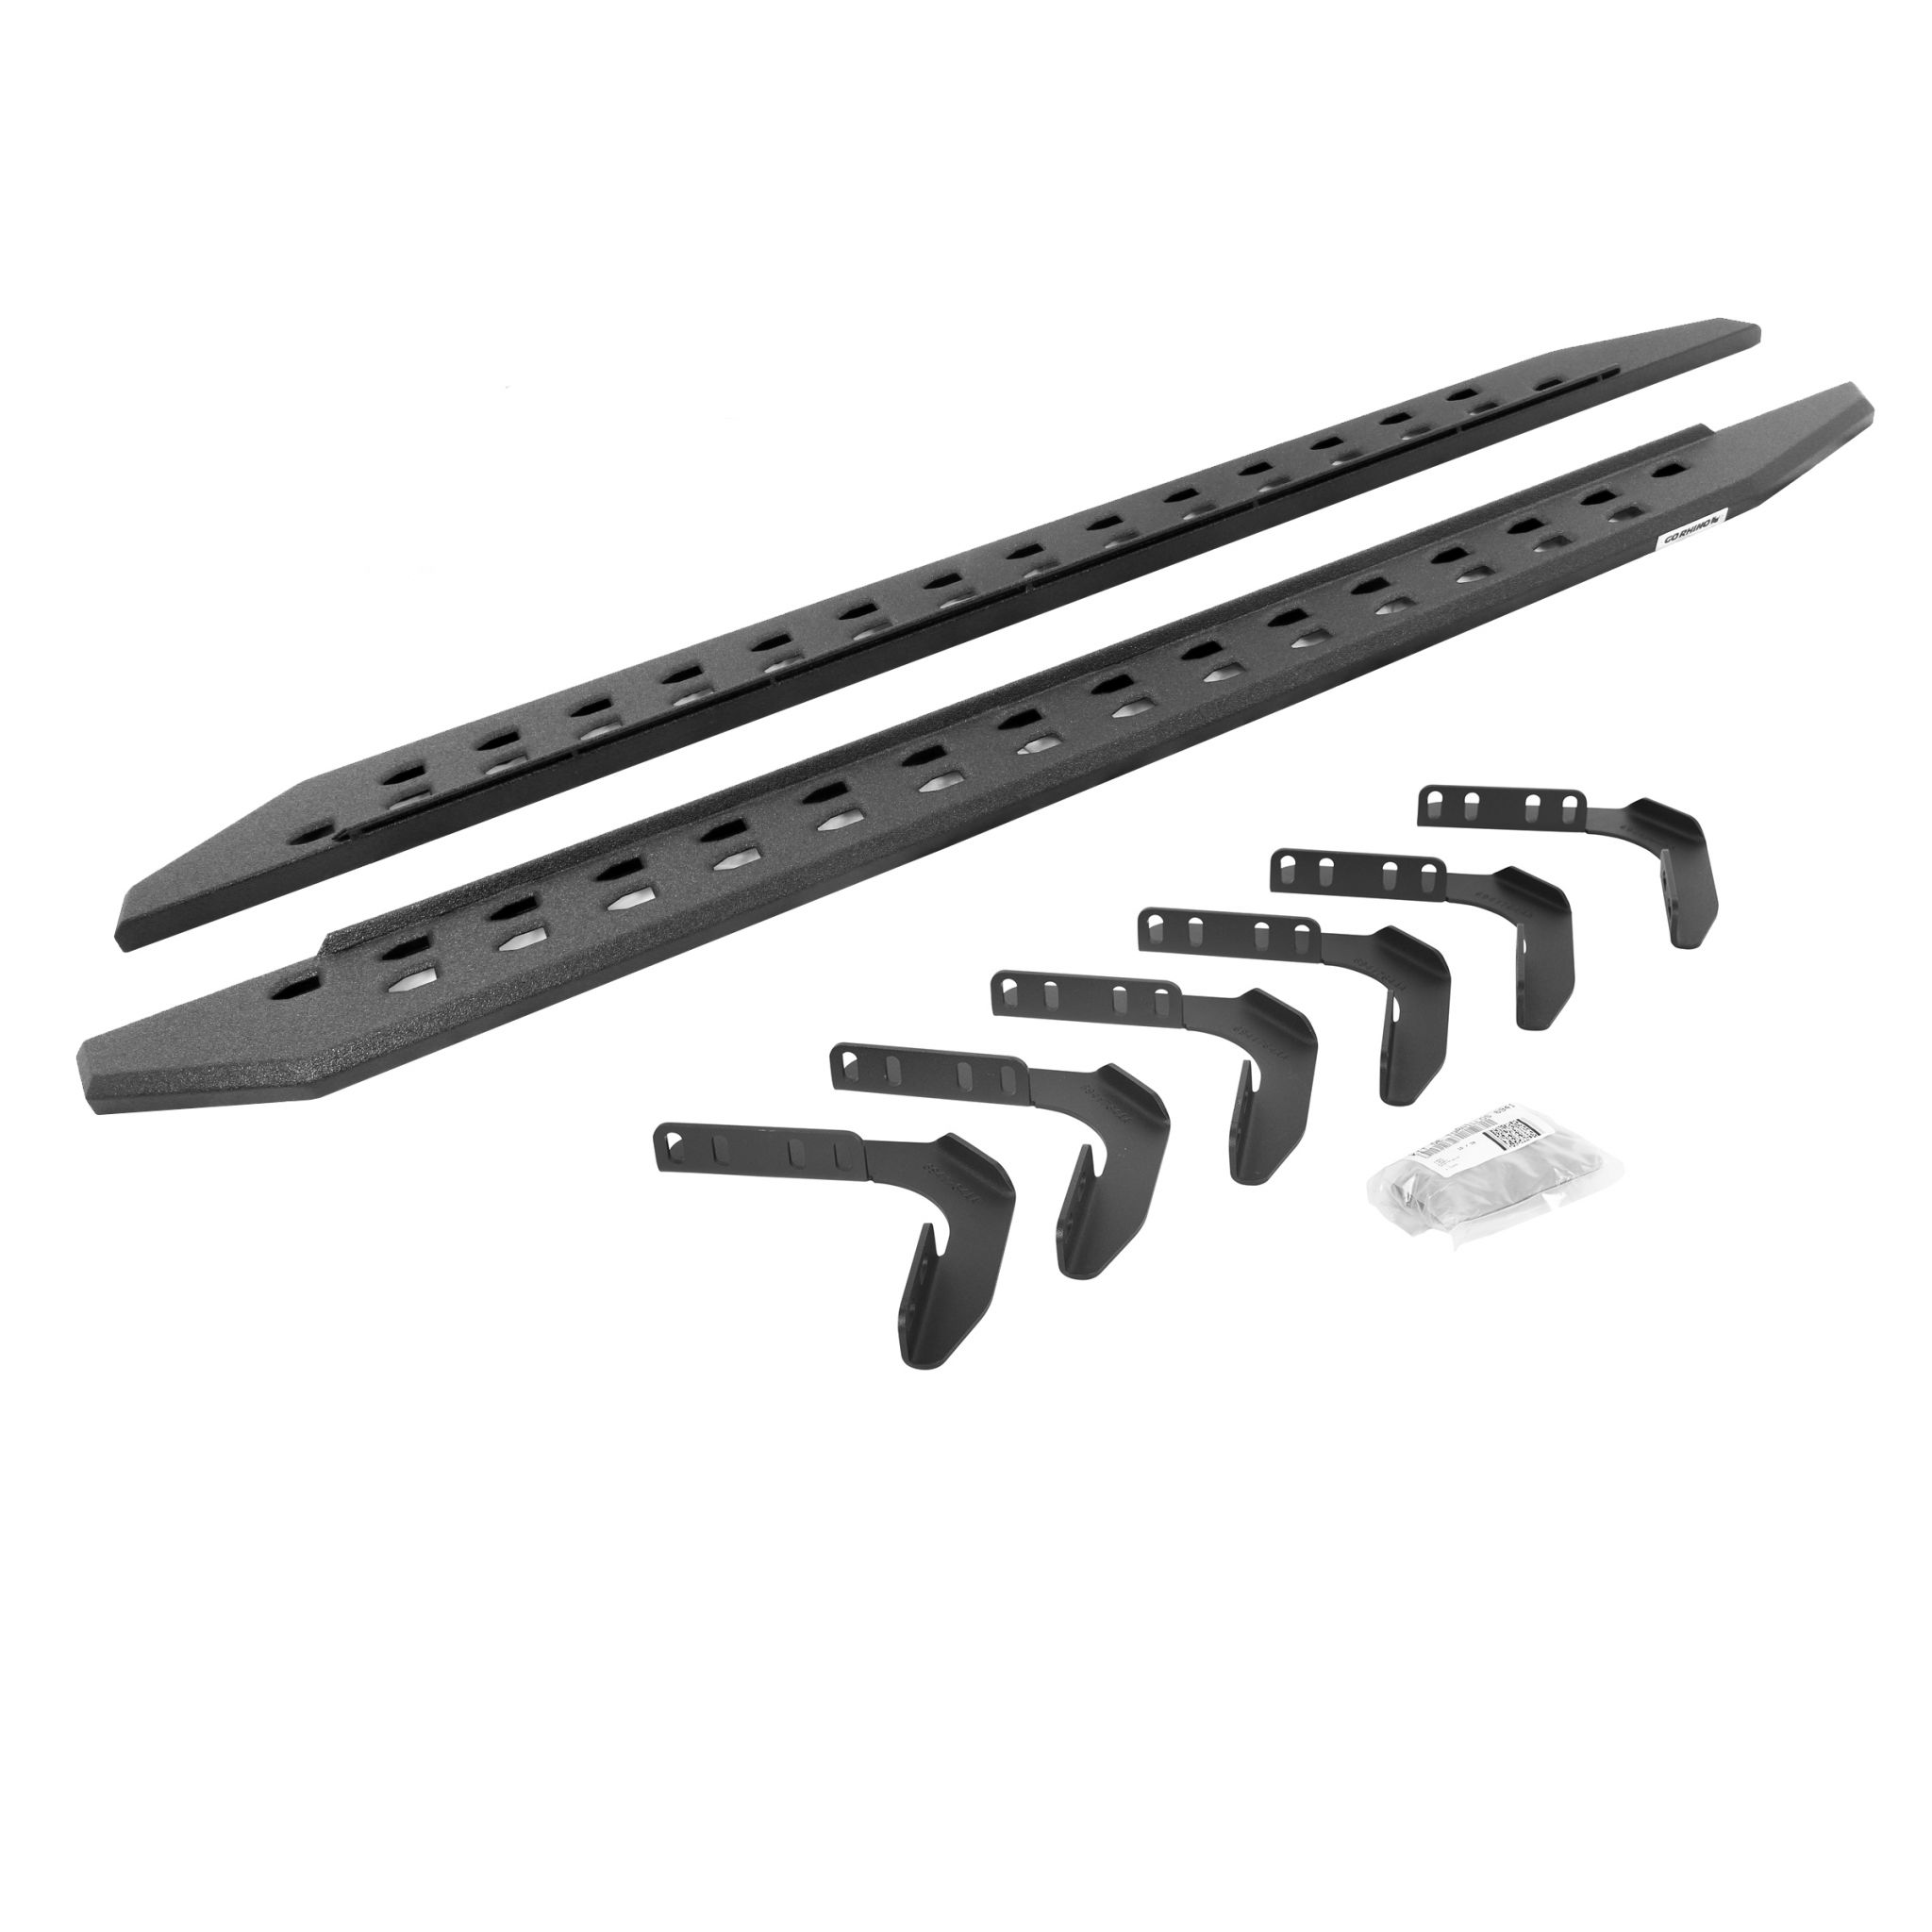 Go Rhino 69418087ST - RB20 Slim Line Running Boards With Mounting Brackets - Protective Bedliner Coating